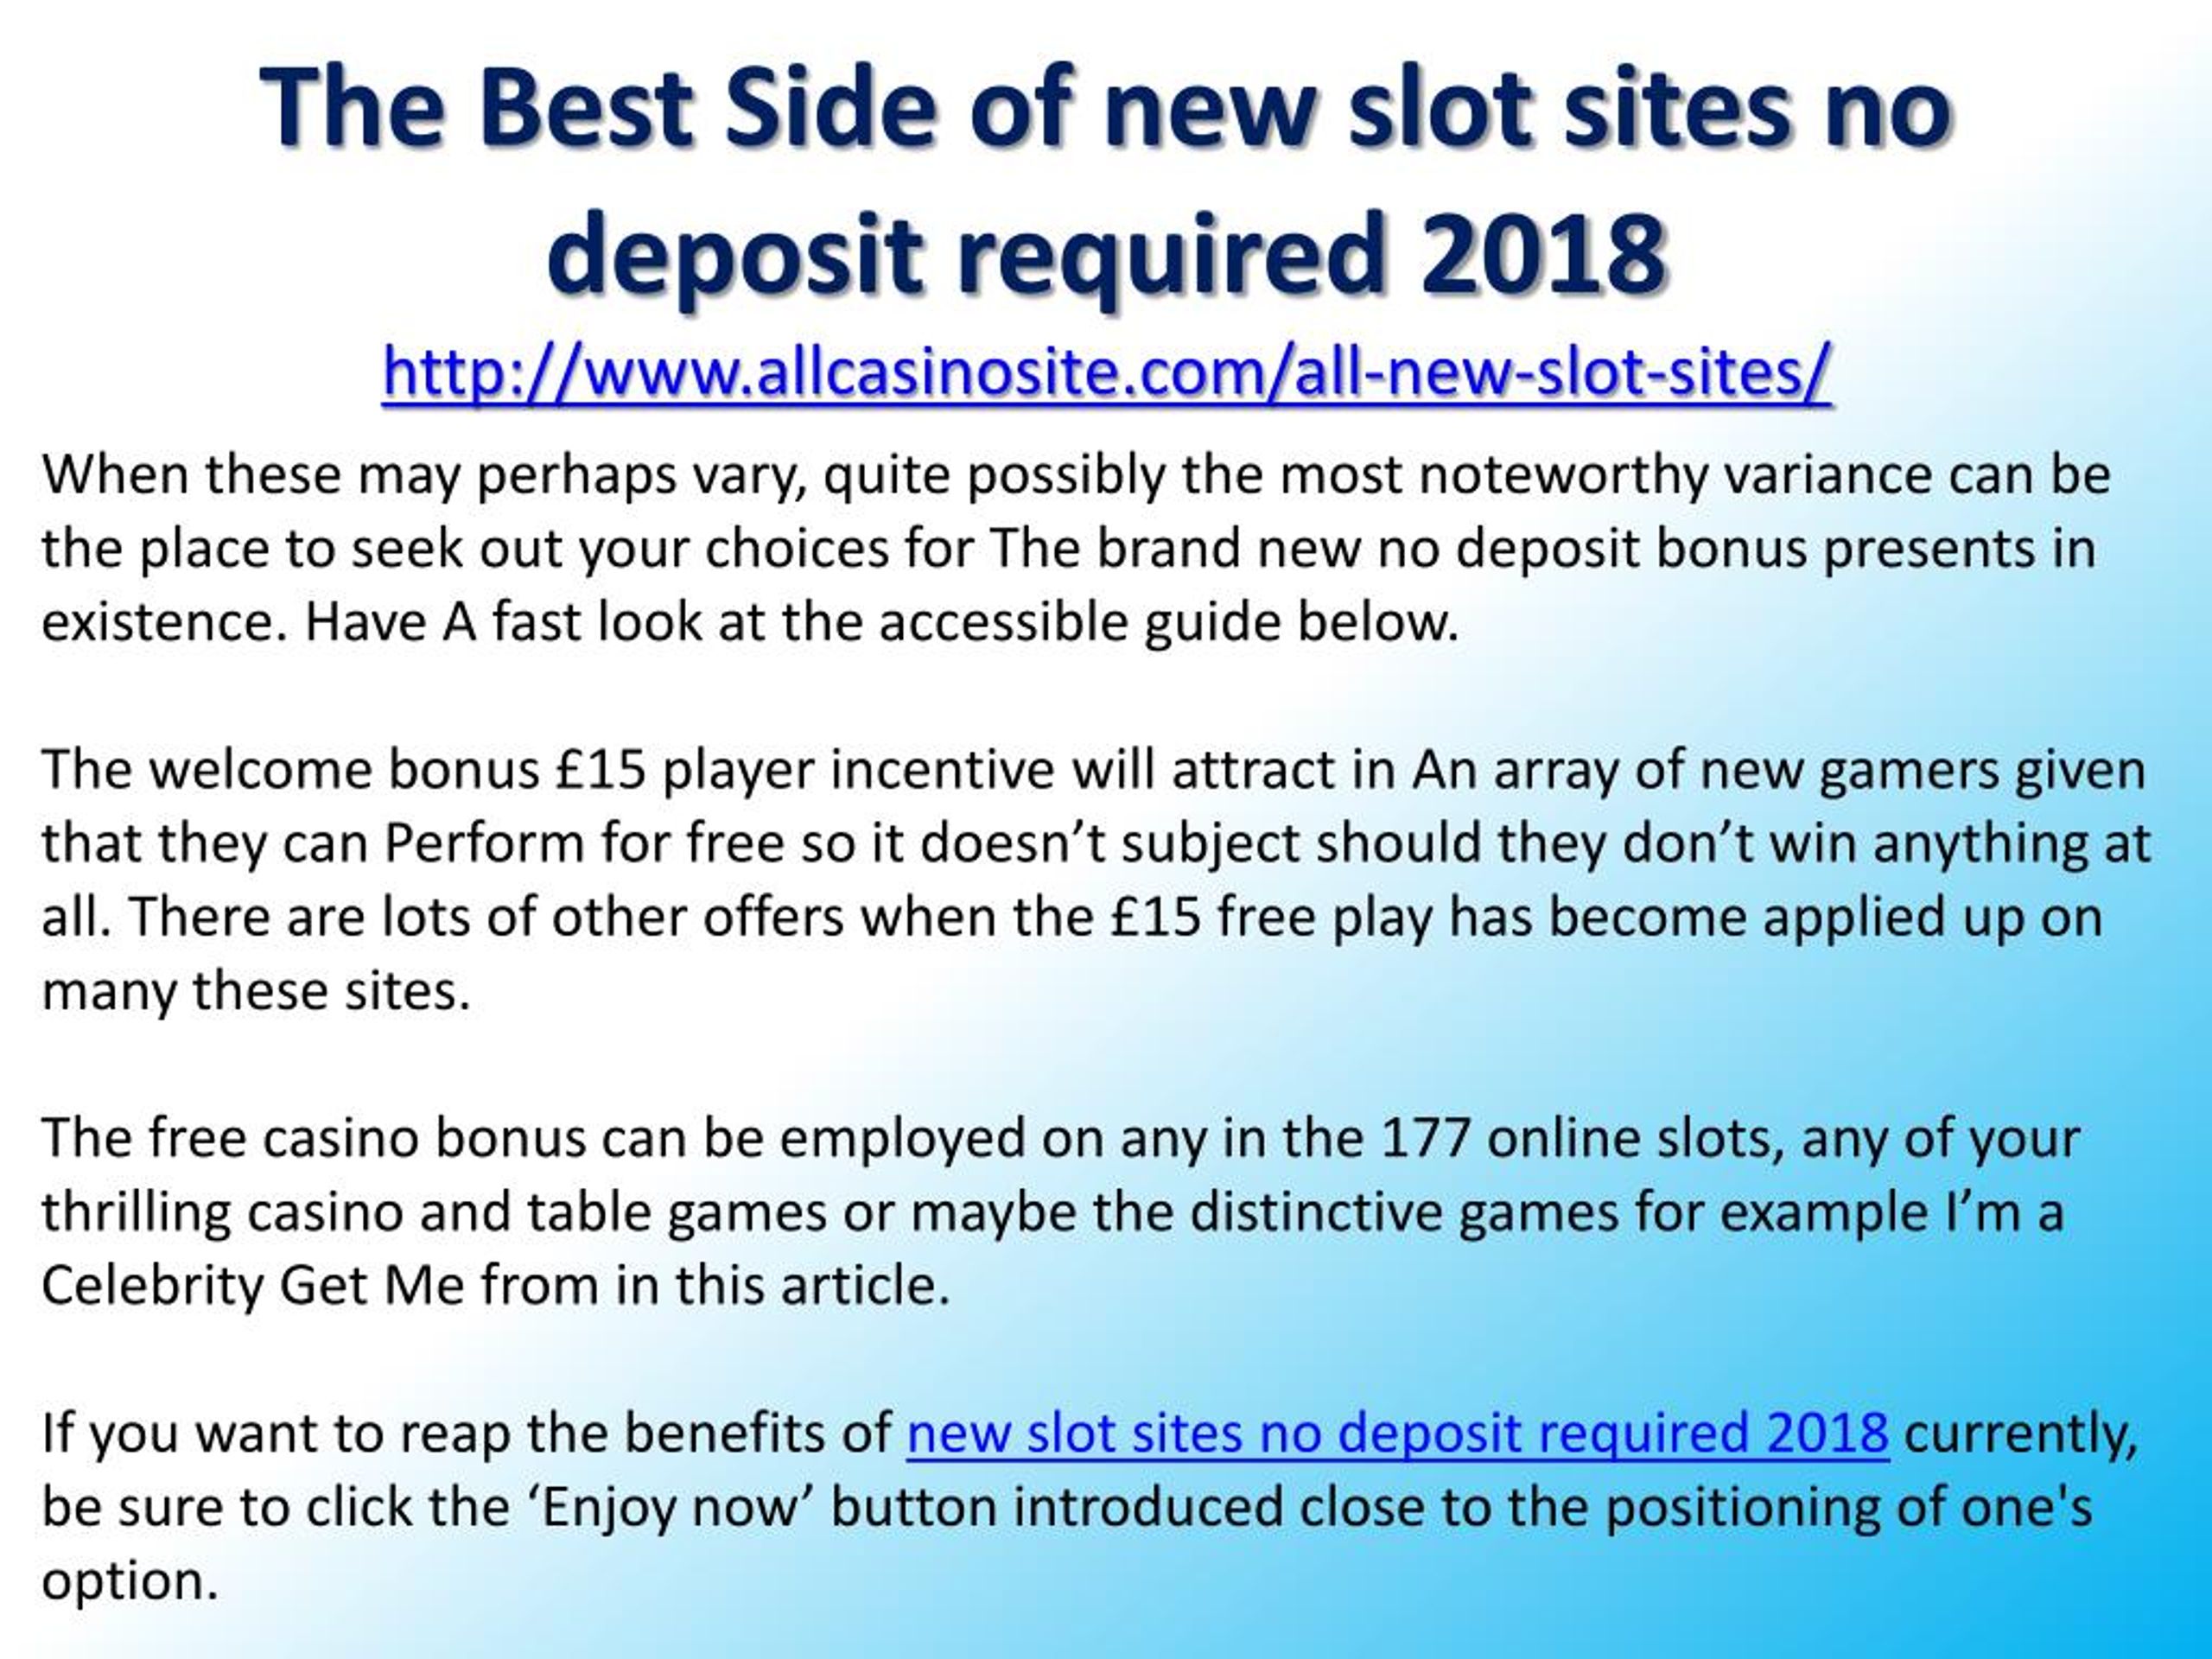 Ppt The Best Side Of New Slot Sites No Deposit Required 2018